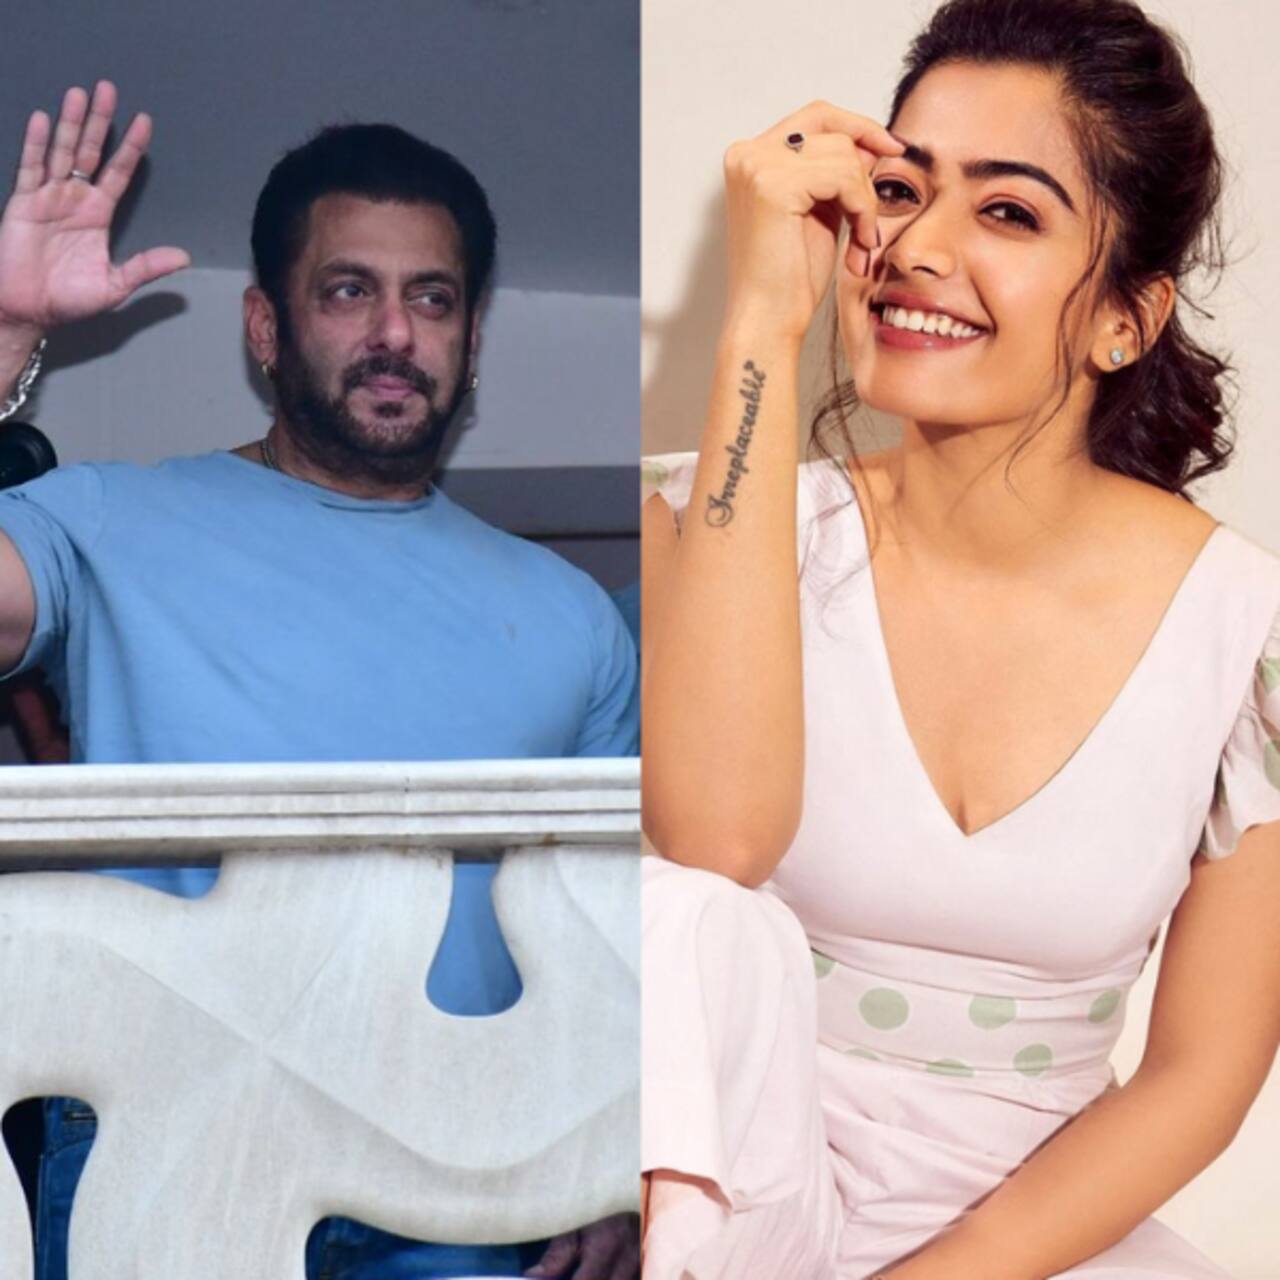 Trending Entertainment News Today: Salman Khan fans face lathi charge, KRK predicts Rashmika Mandanna has no future in Bollywood and more